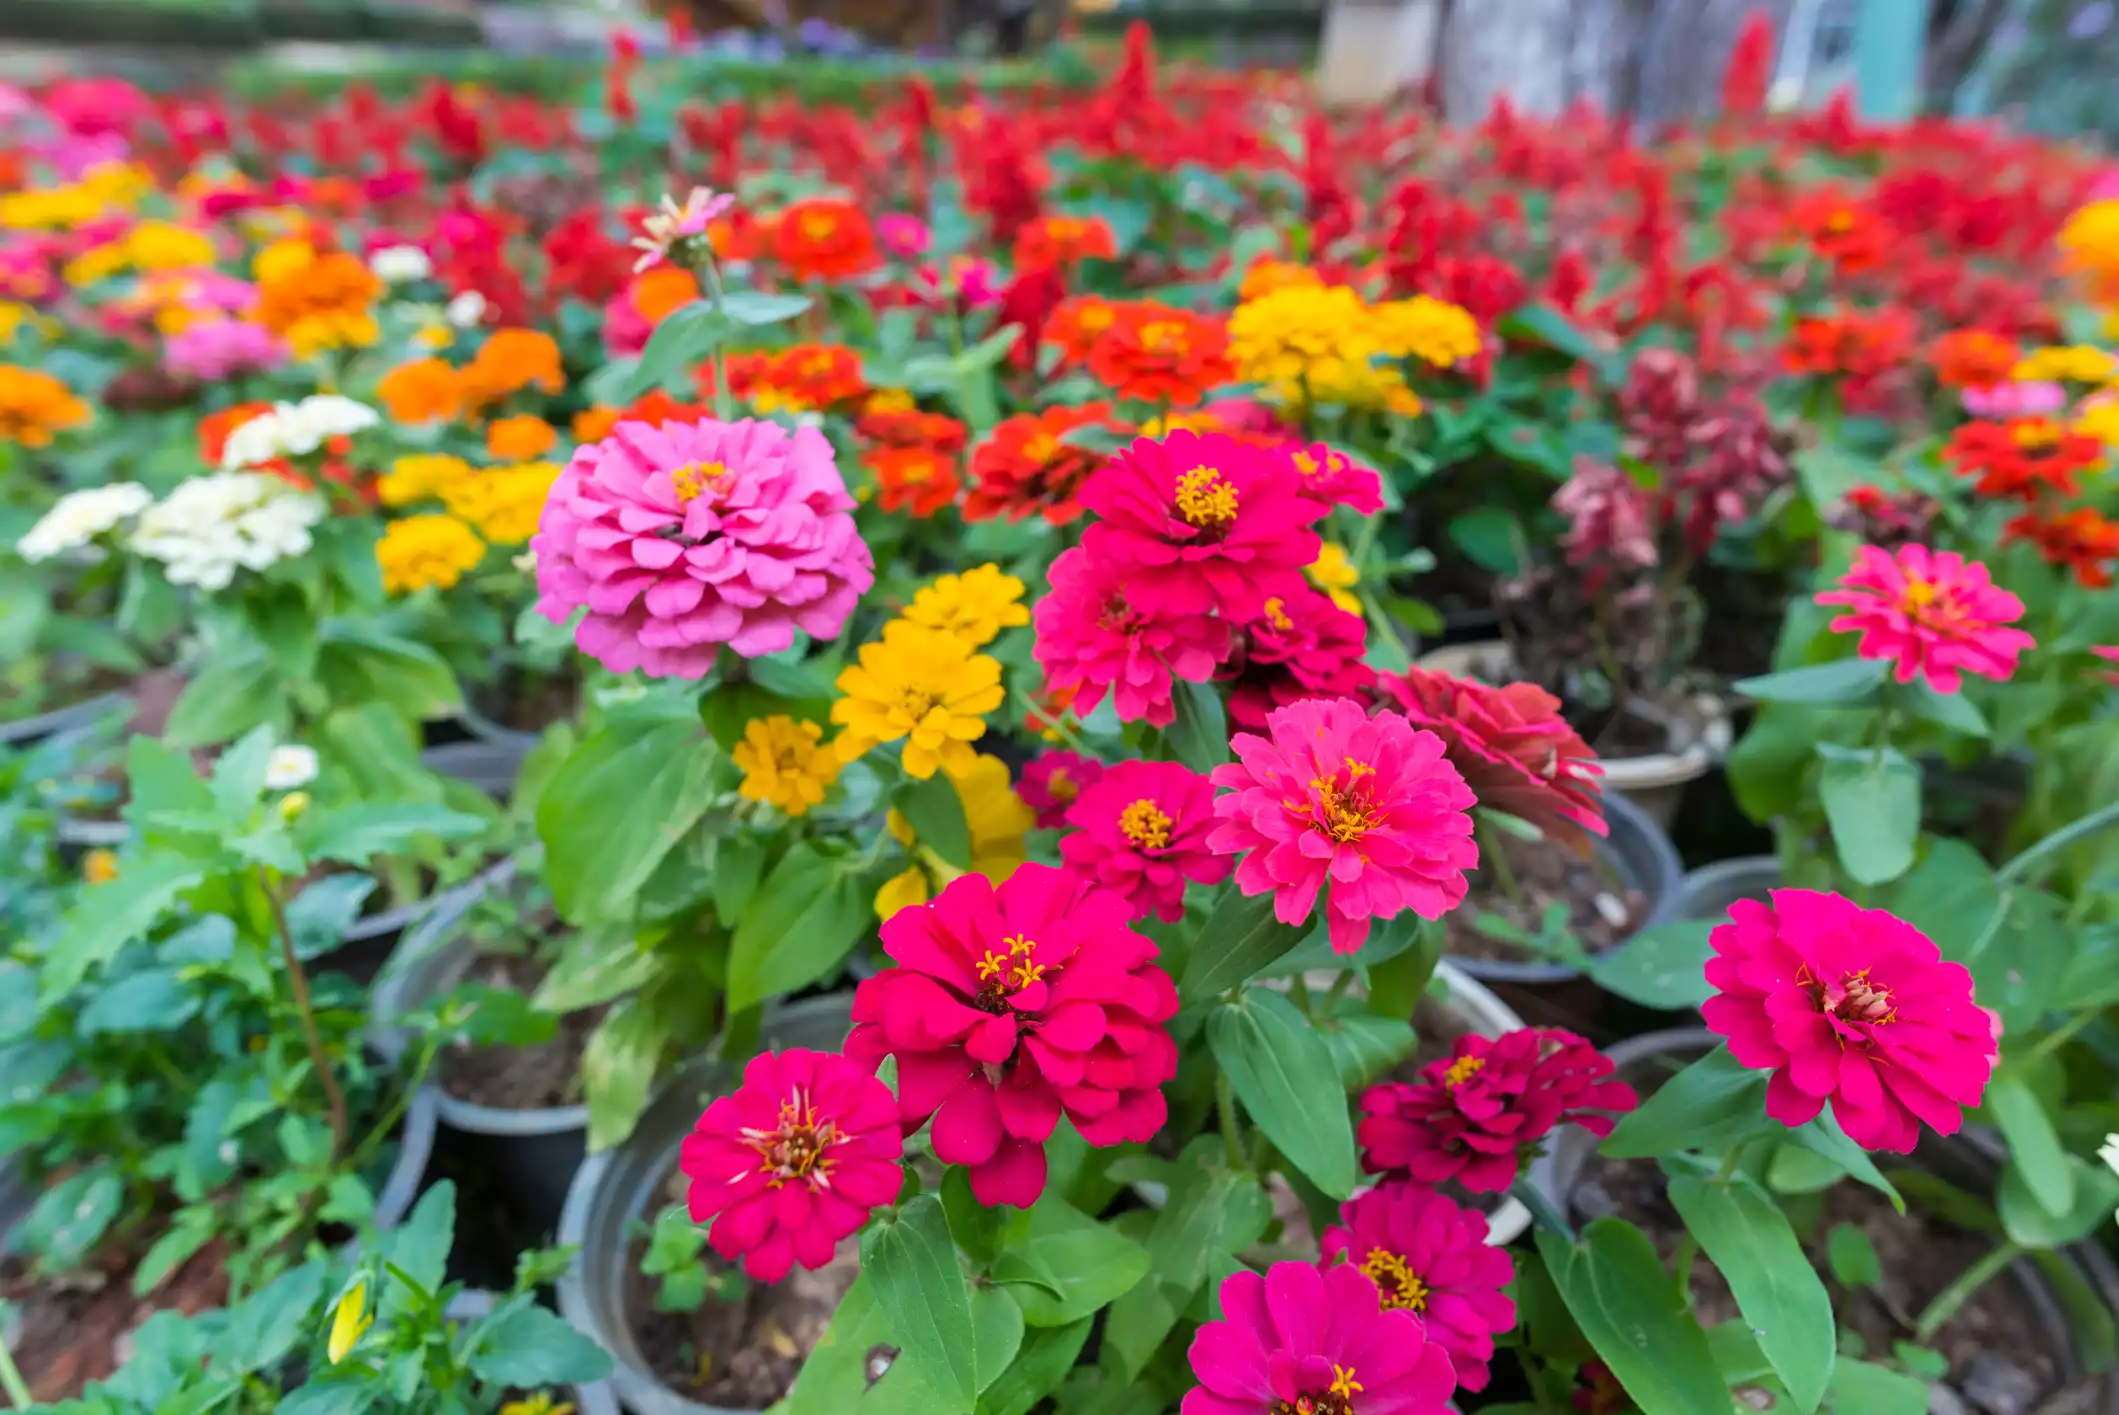 Zinnias in all colors growing in pots outside